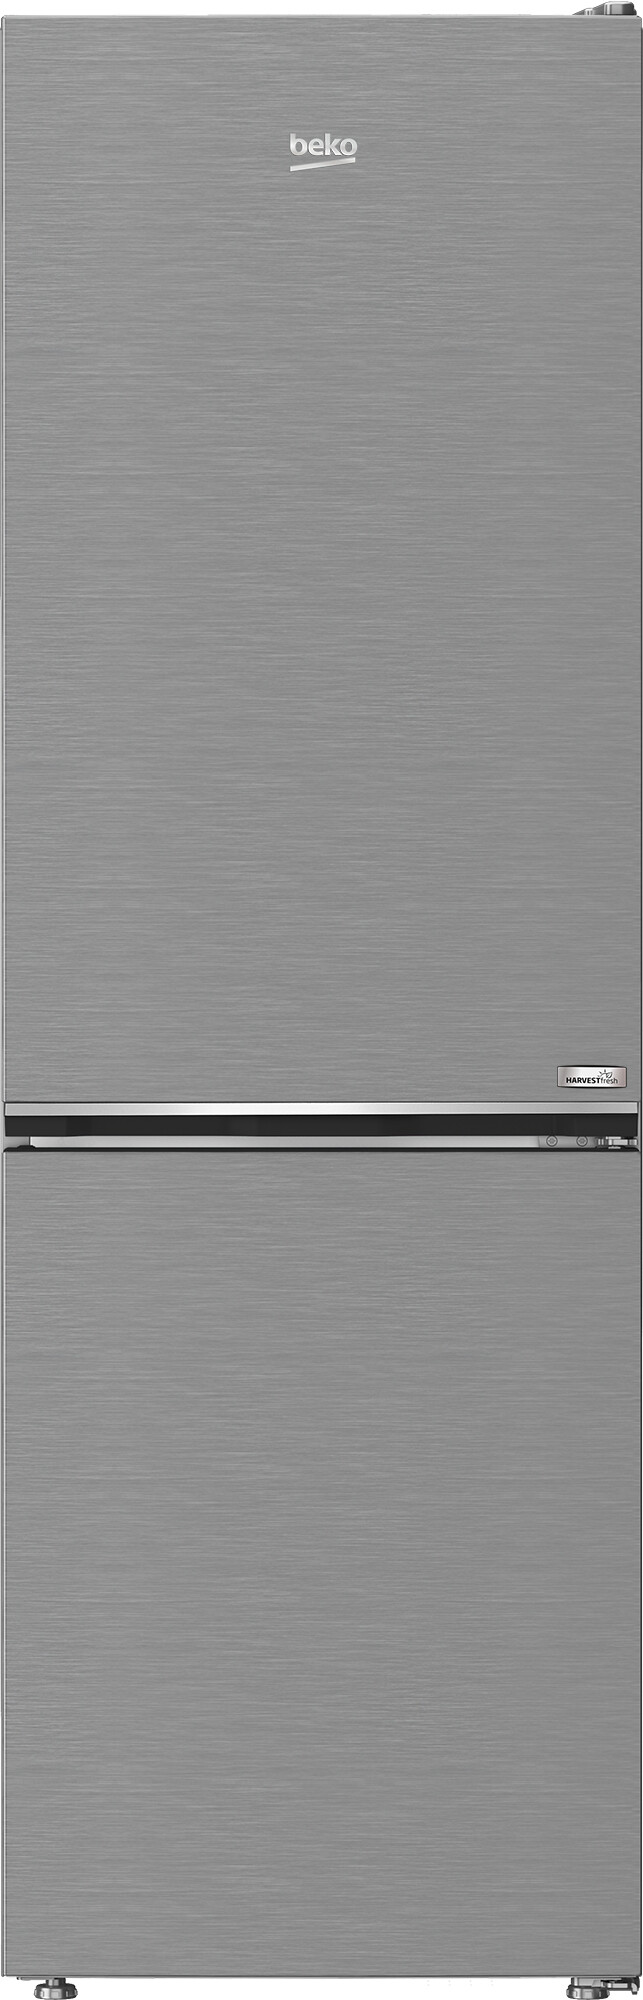 Beko CFG4686VPS 60/40 Frost Free Fridge Freezer – Stainless Steel Effect – E Rated #364545